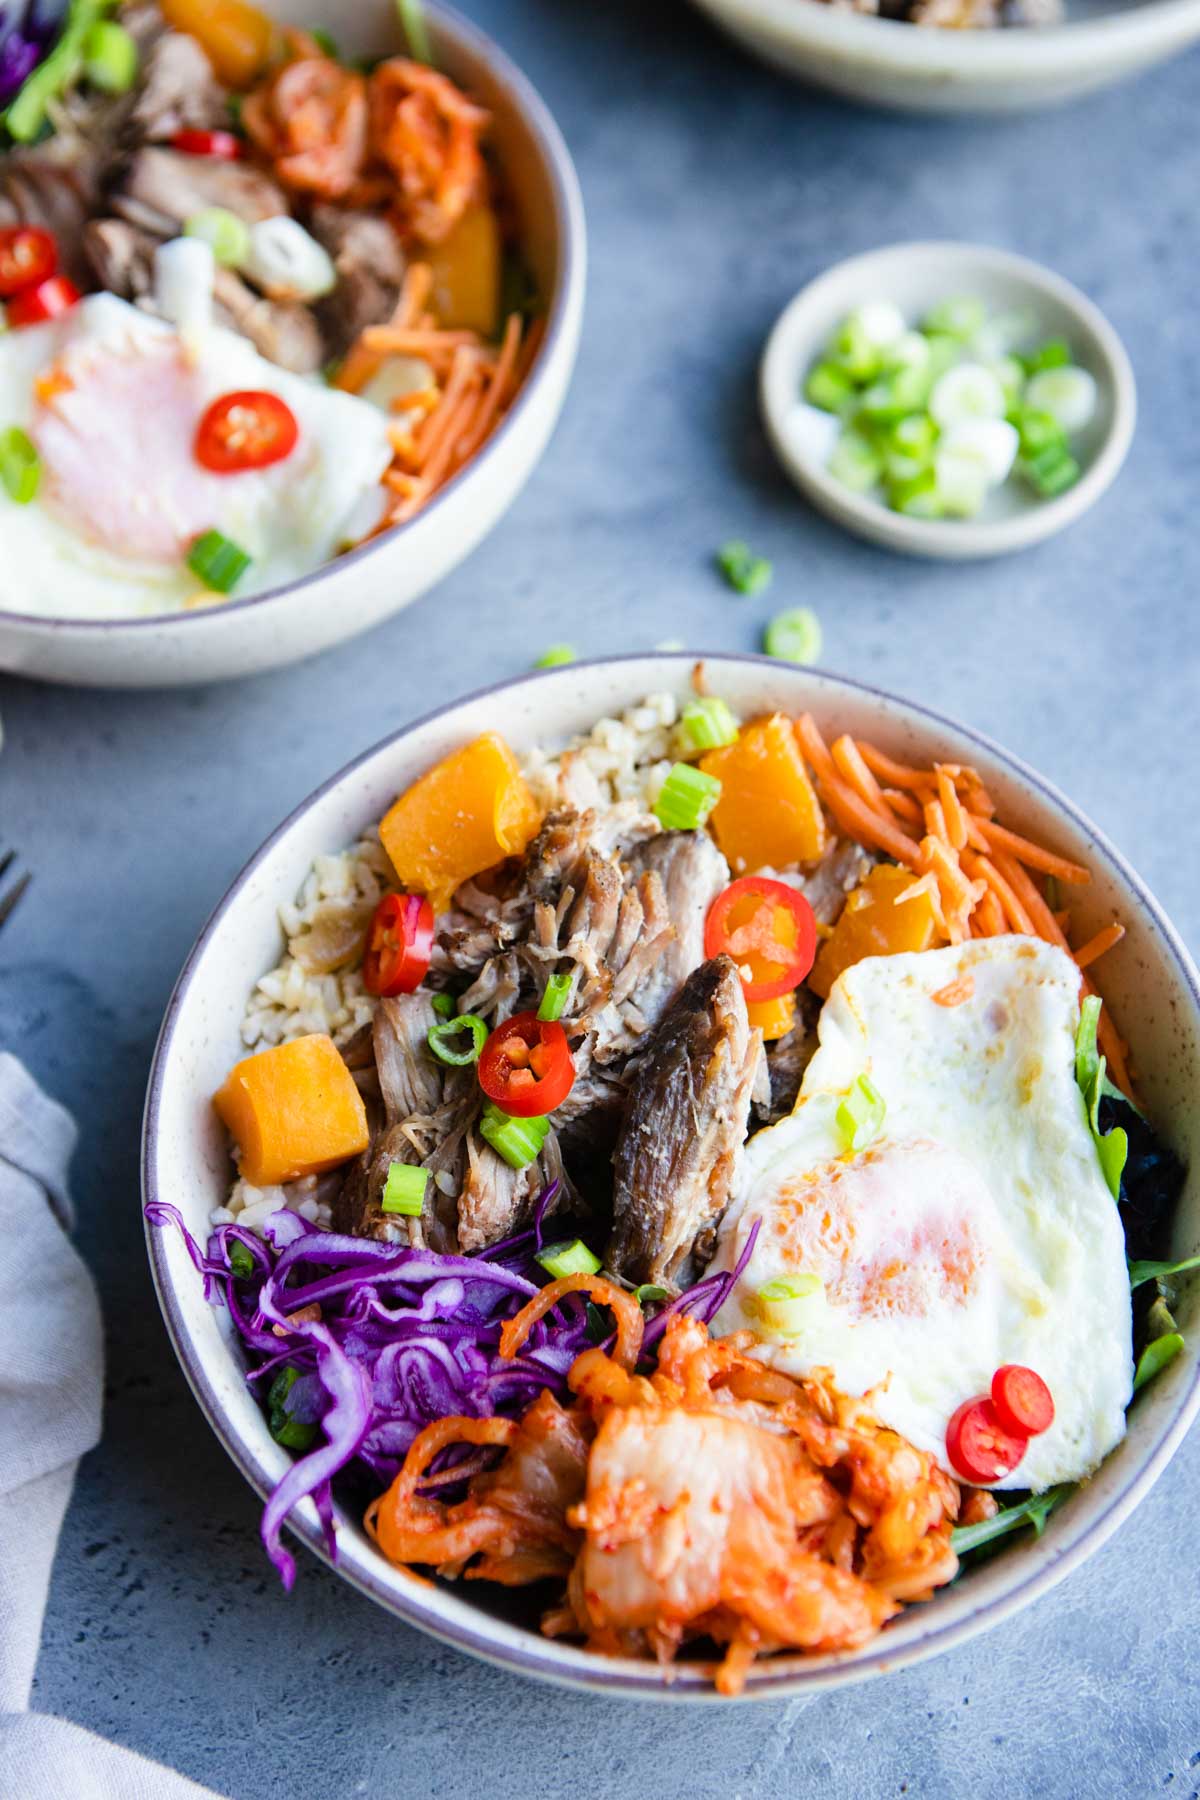 2 beige bowls filled with shredded pork, butternut squash and topped with veggie garnishes 